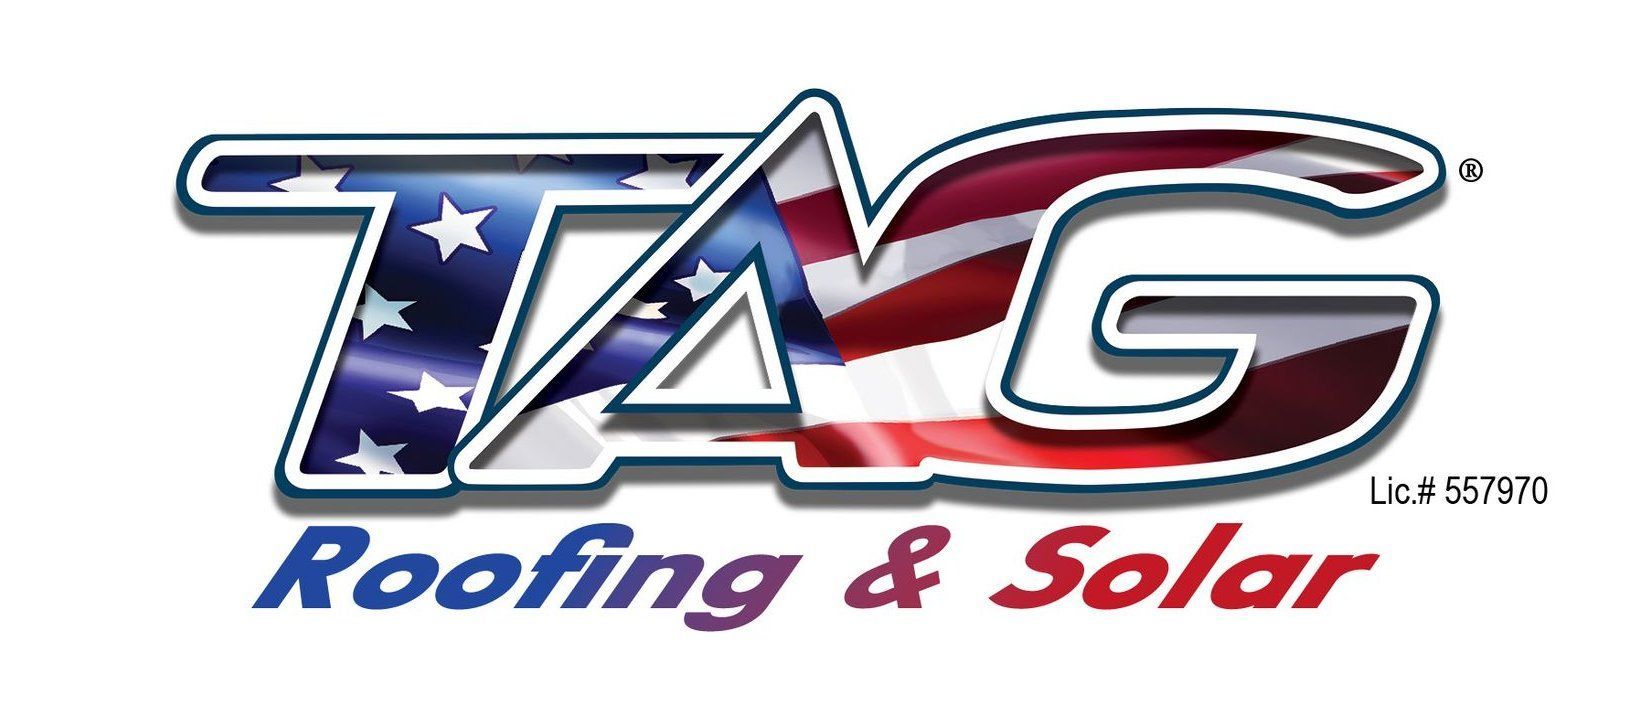 A tag construction and roofing logo with an american flag on it